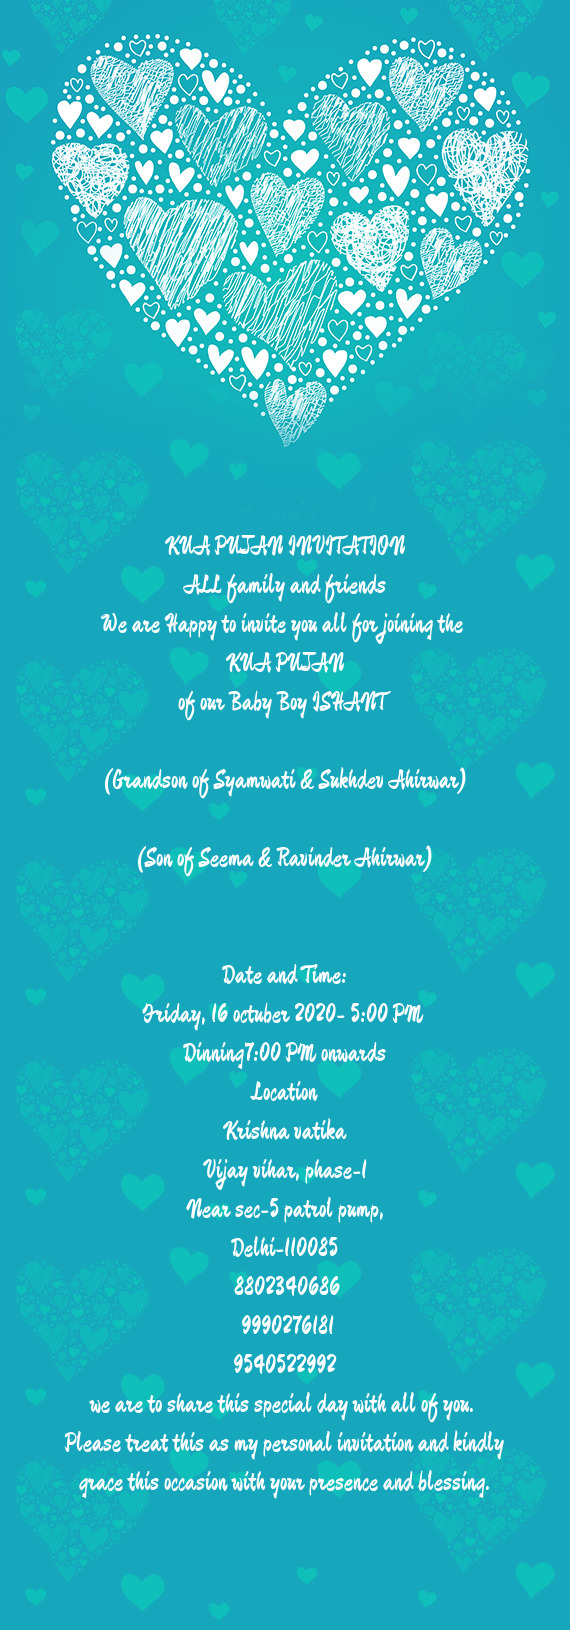 KUA PUJAN INVITATION
 ALL family and friends
 We are Happy to invite you all for joining the 
 KUA P